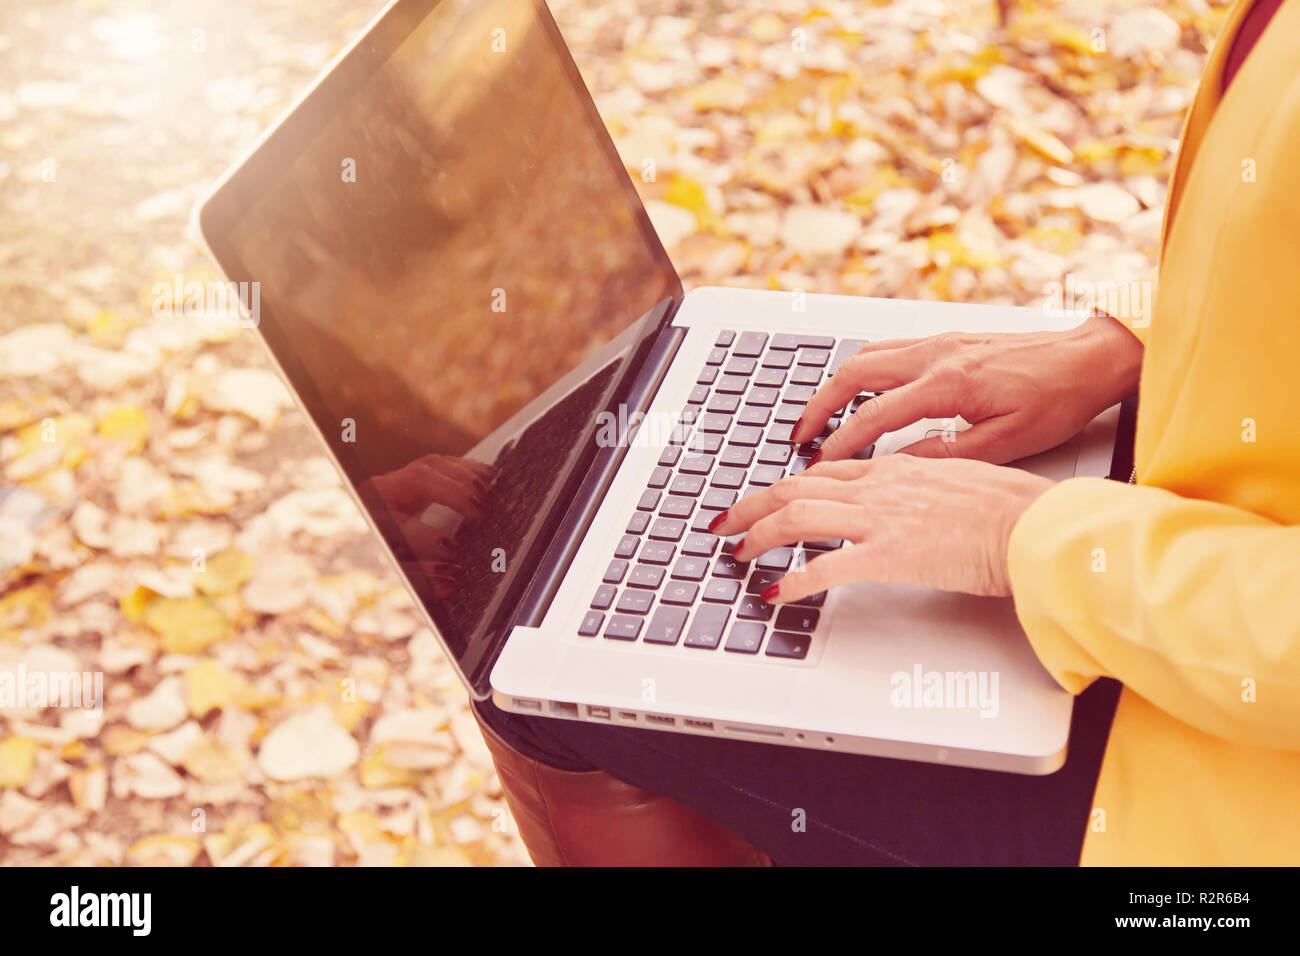 Girl working on a laptop in the park Sunny autumn day in the park. Stock Photo